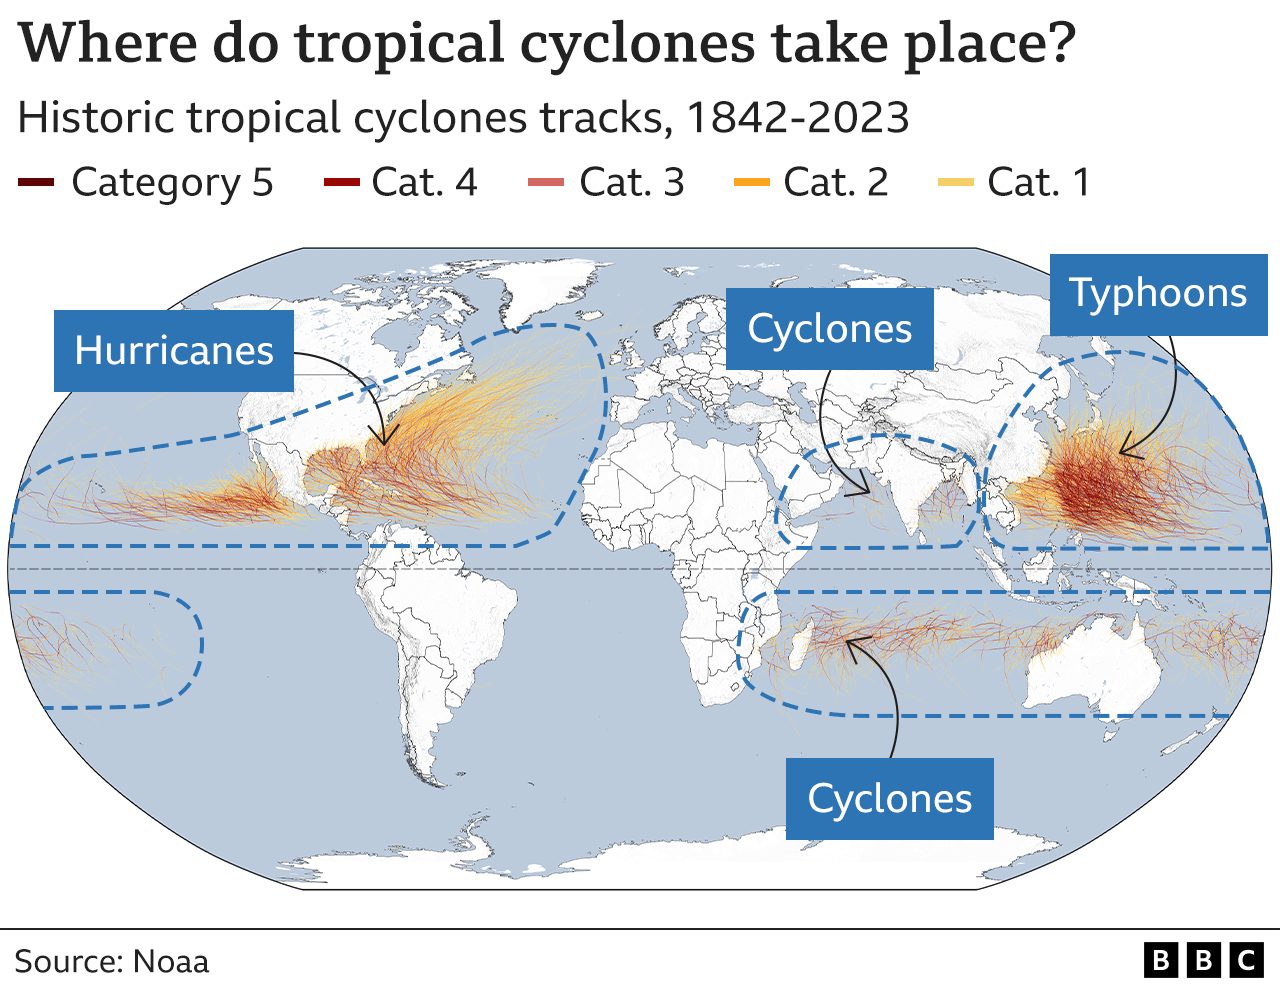 Graphic showing storm tracks of tropical cyclones from 1842-2023. These storms are called hurricanes in the Atlantic and north-east Pacific, typhoons in the north-west Pacific, and a cyclone in the south-west Pacific and Indian Ocean.